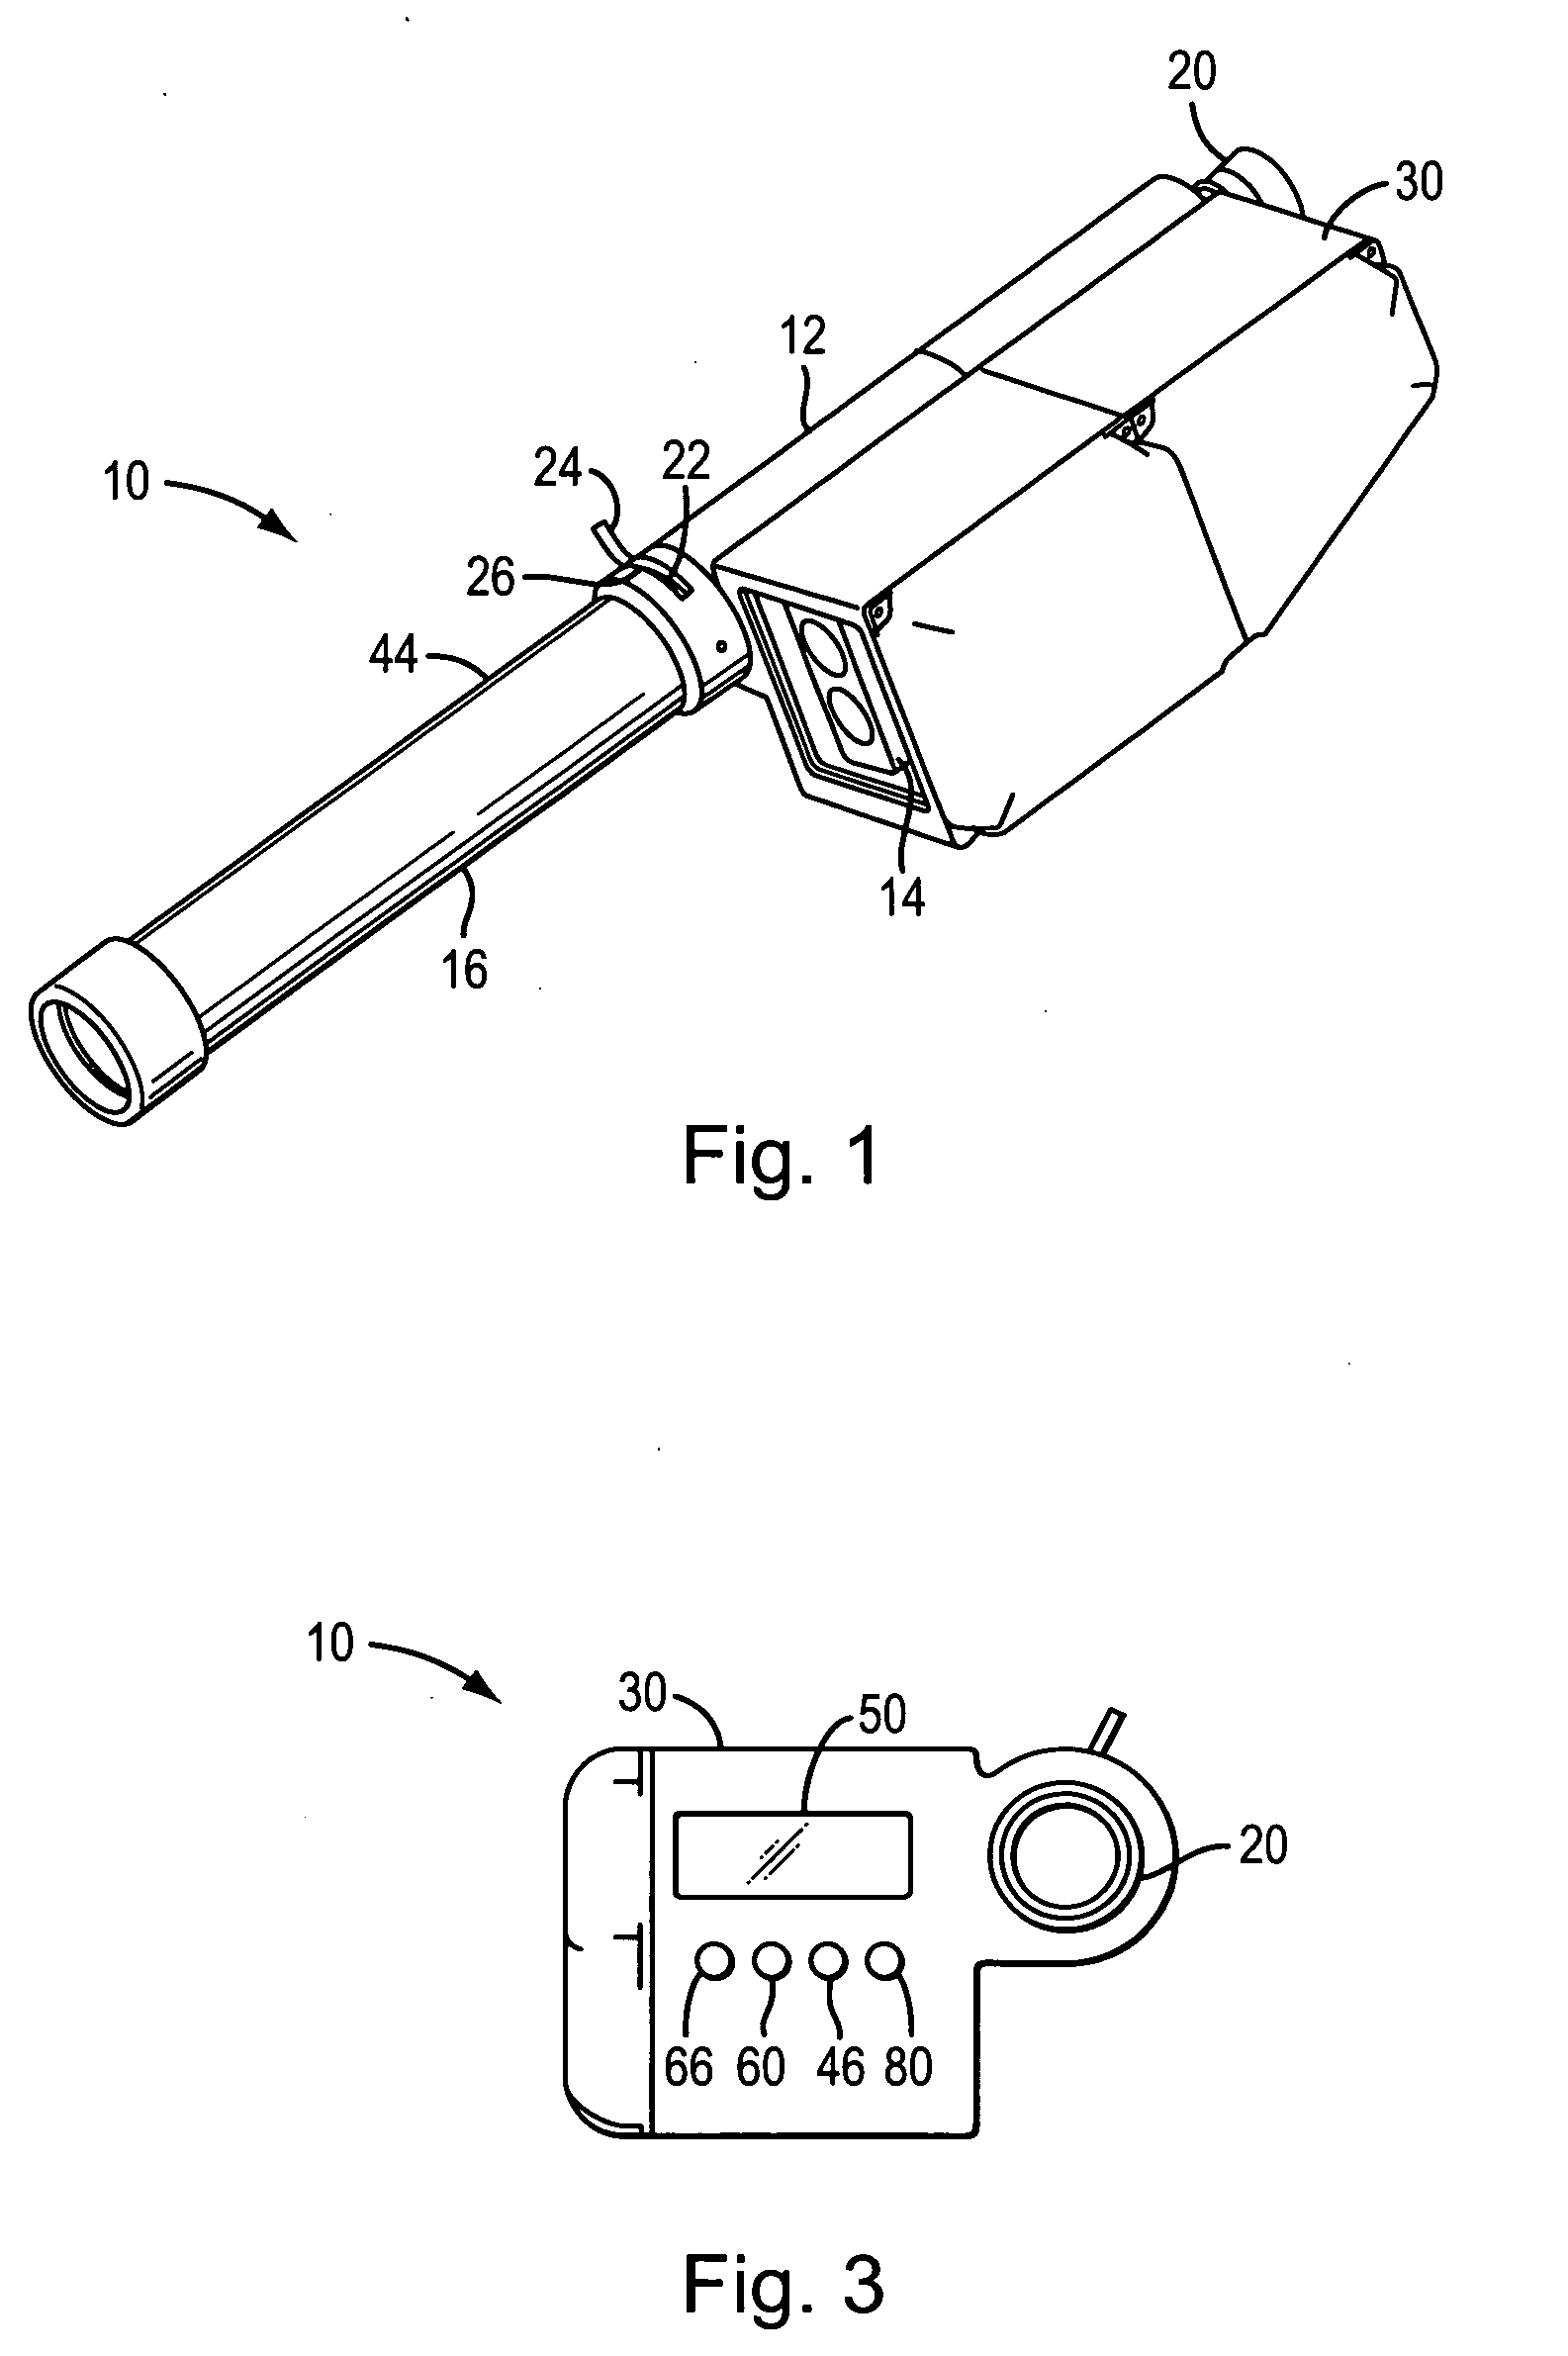 Light meter apparatus and system